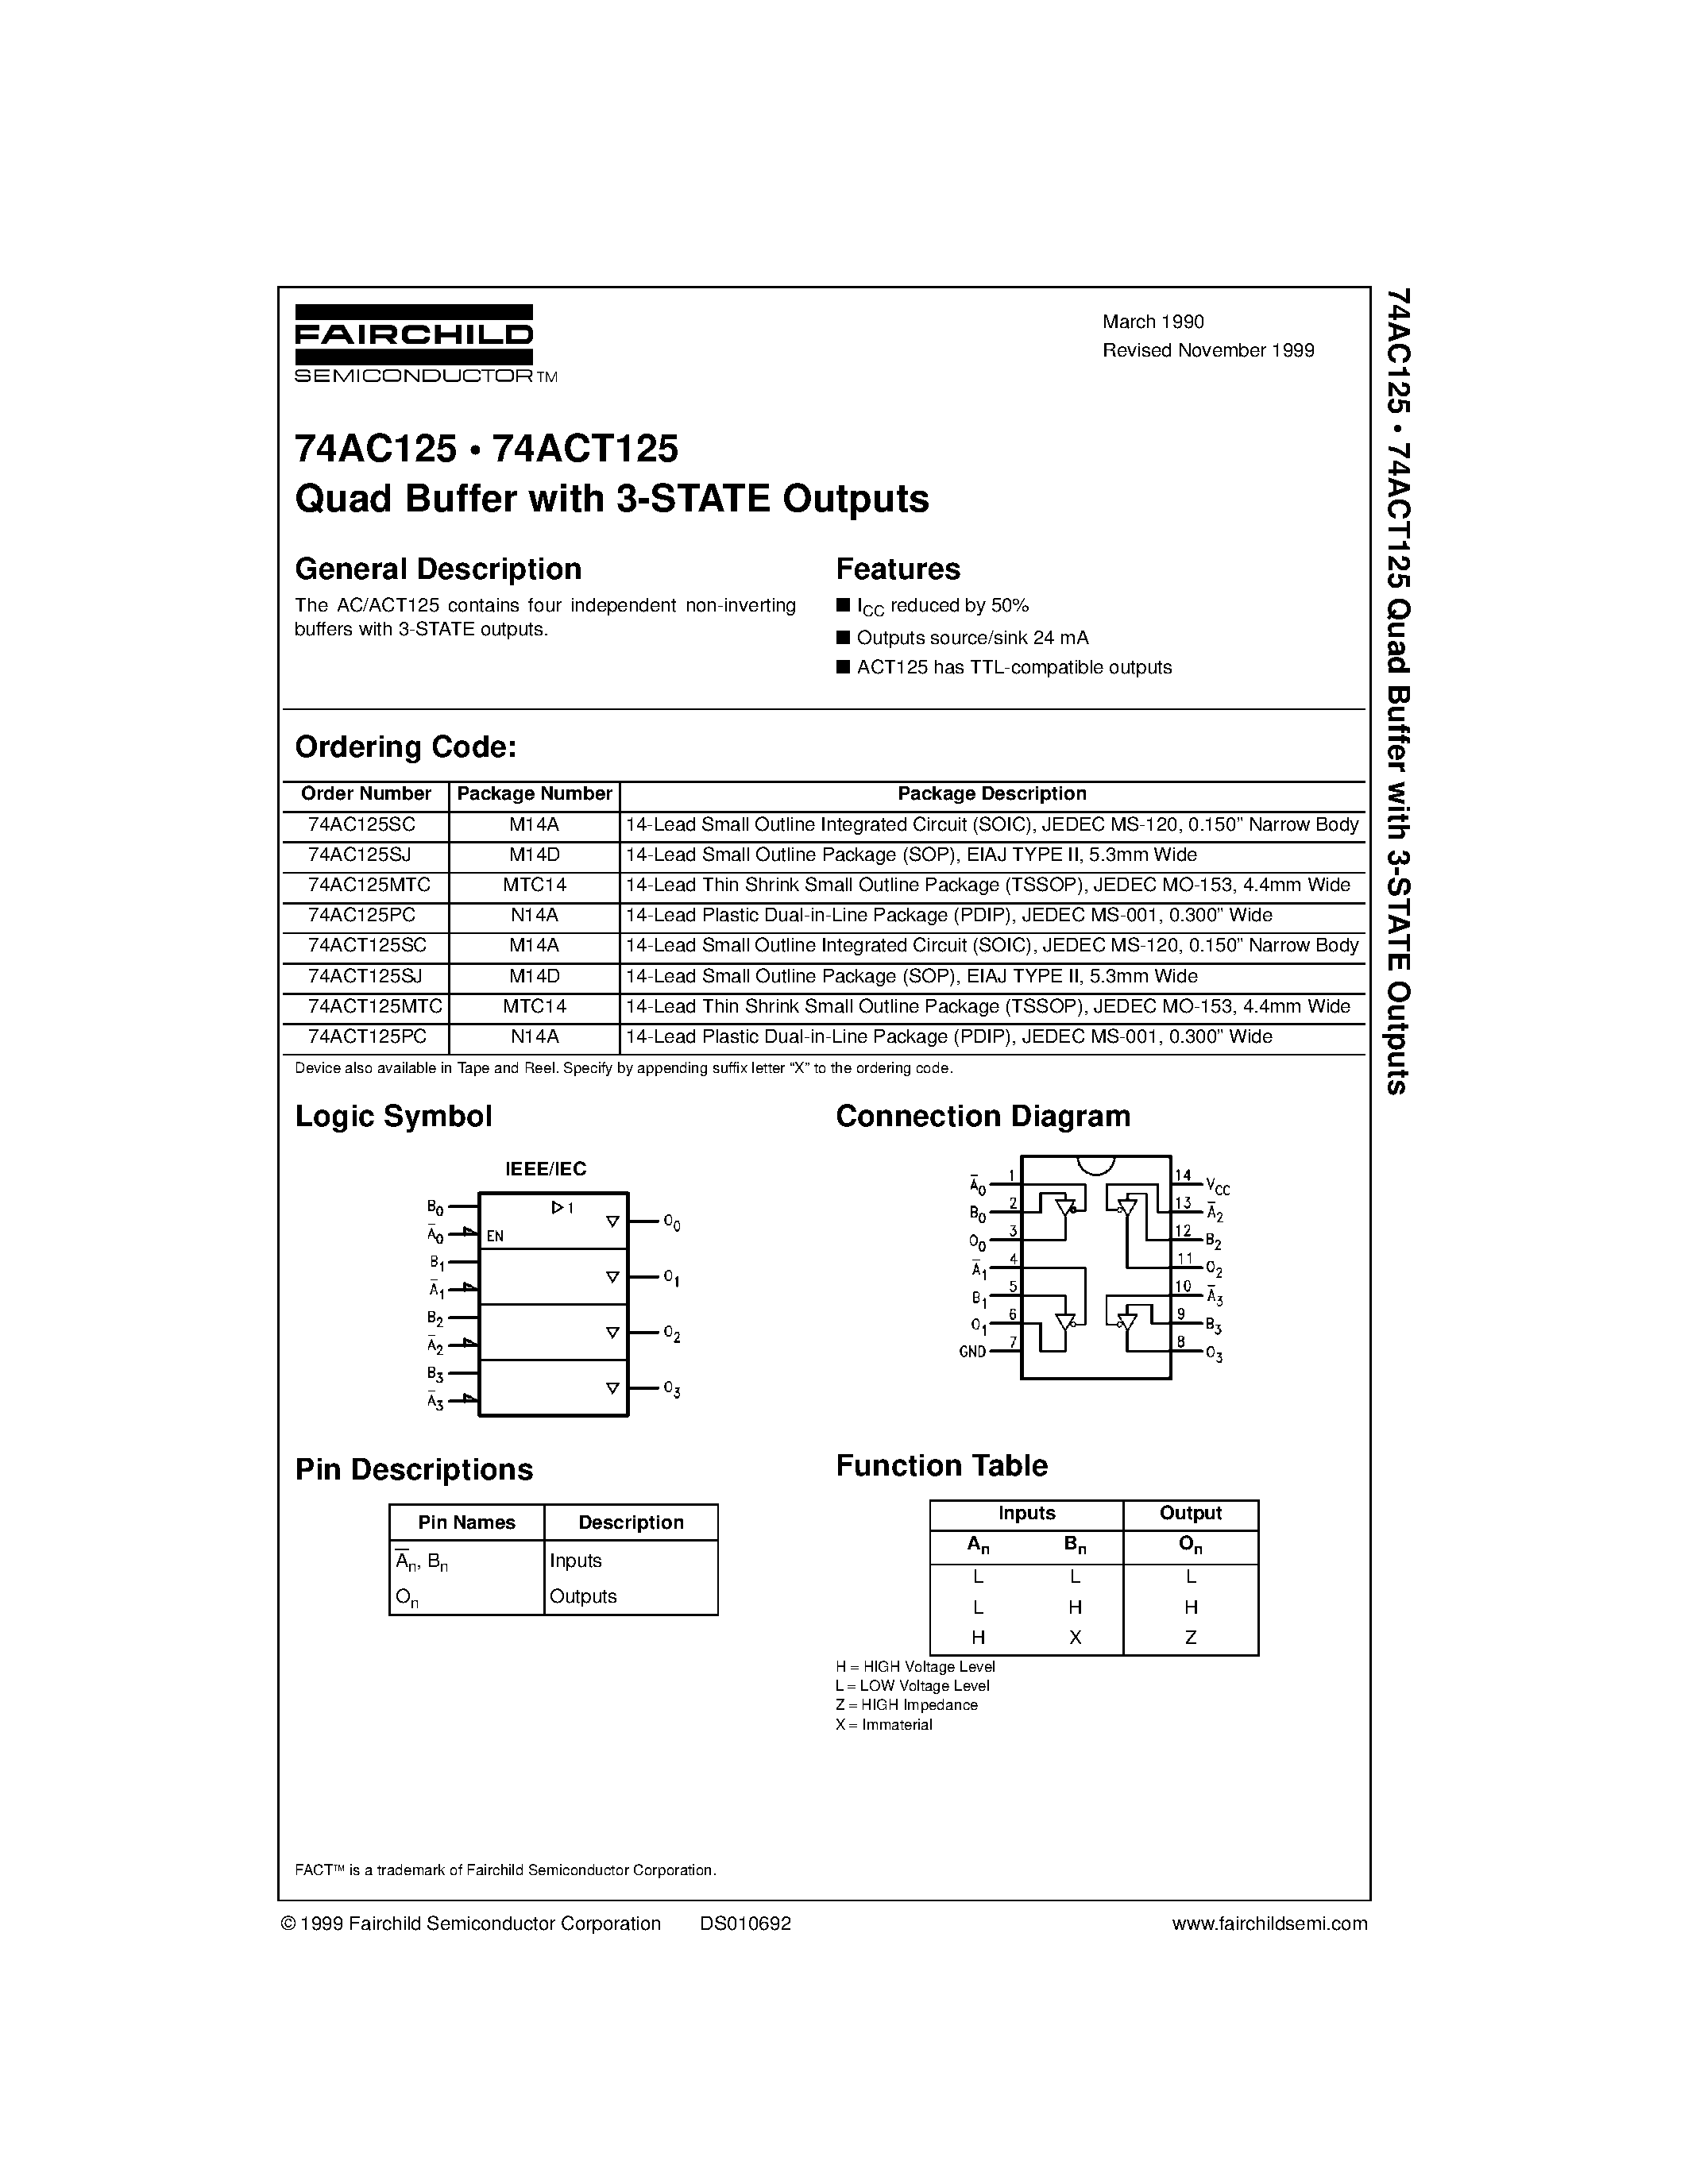 Datasheet 74AC125PC - Quad Buffer with 3-STATE Outputs page 1